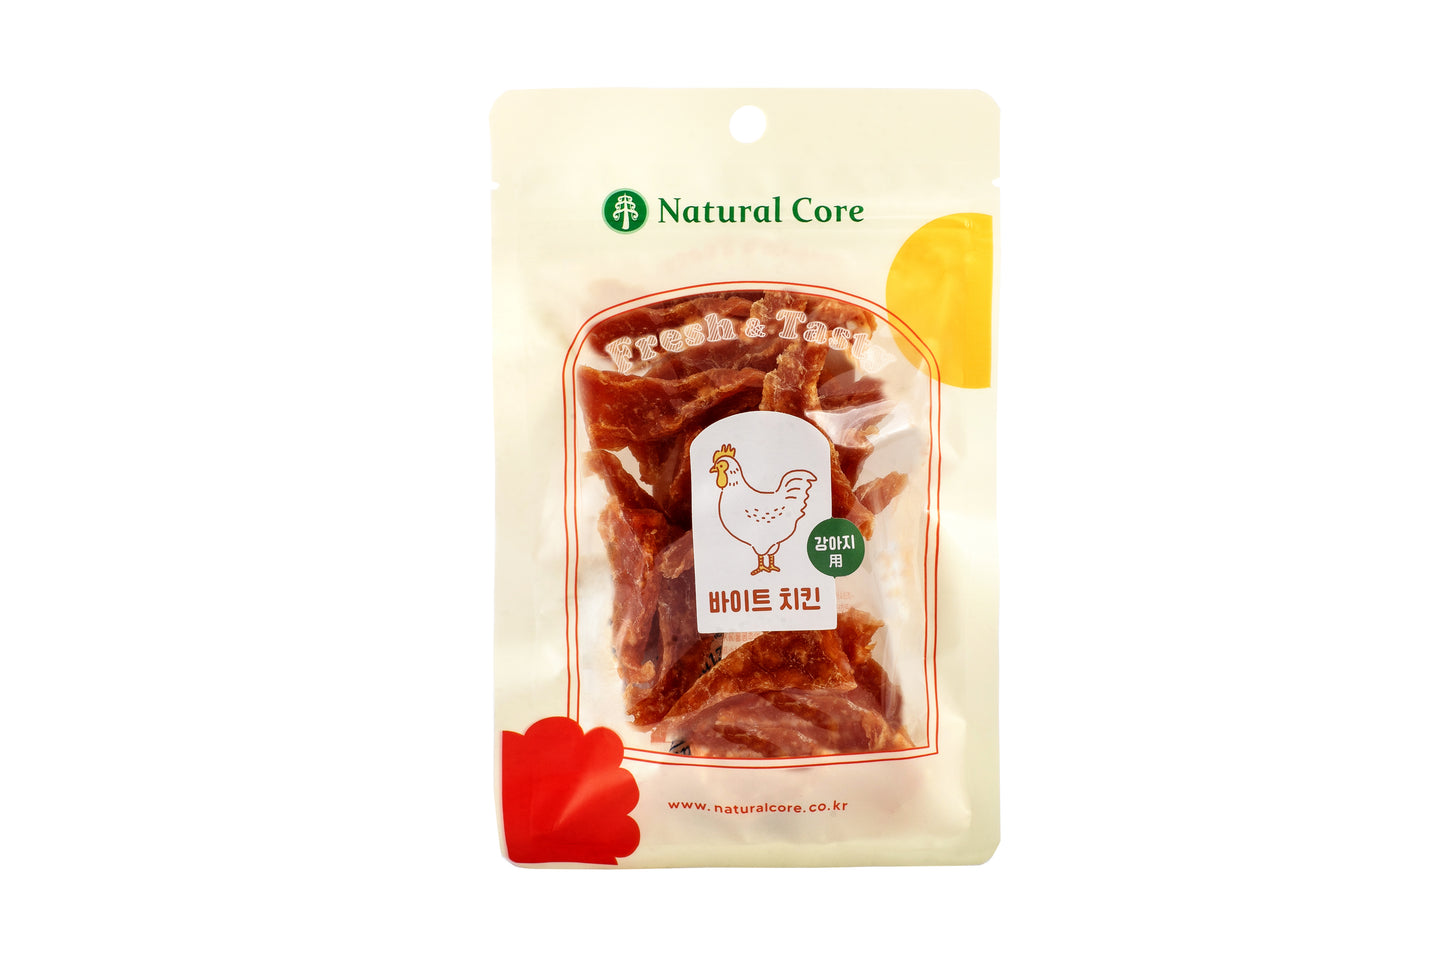 [Natural Core] Bite Duck 70g: Savory & Healthy Hand-Cut Duck Delight!